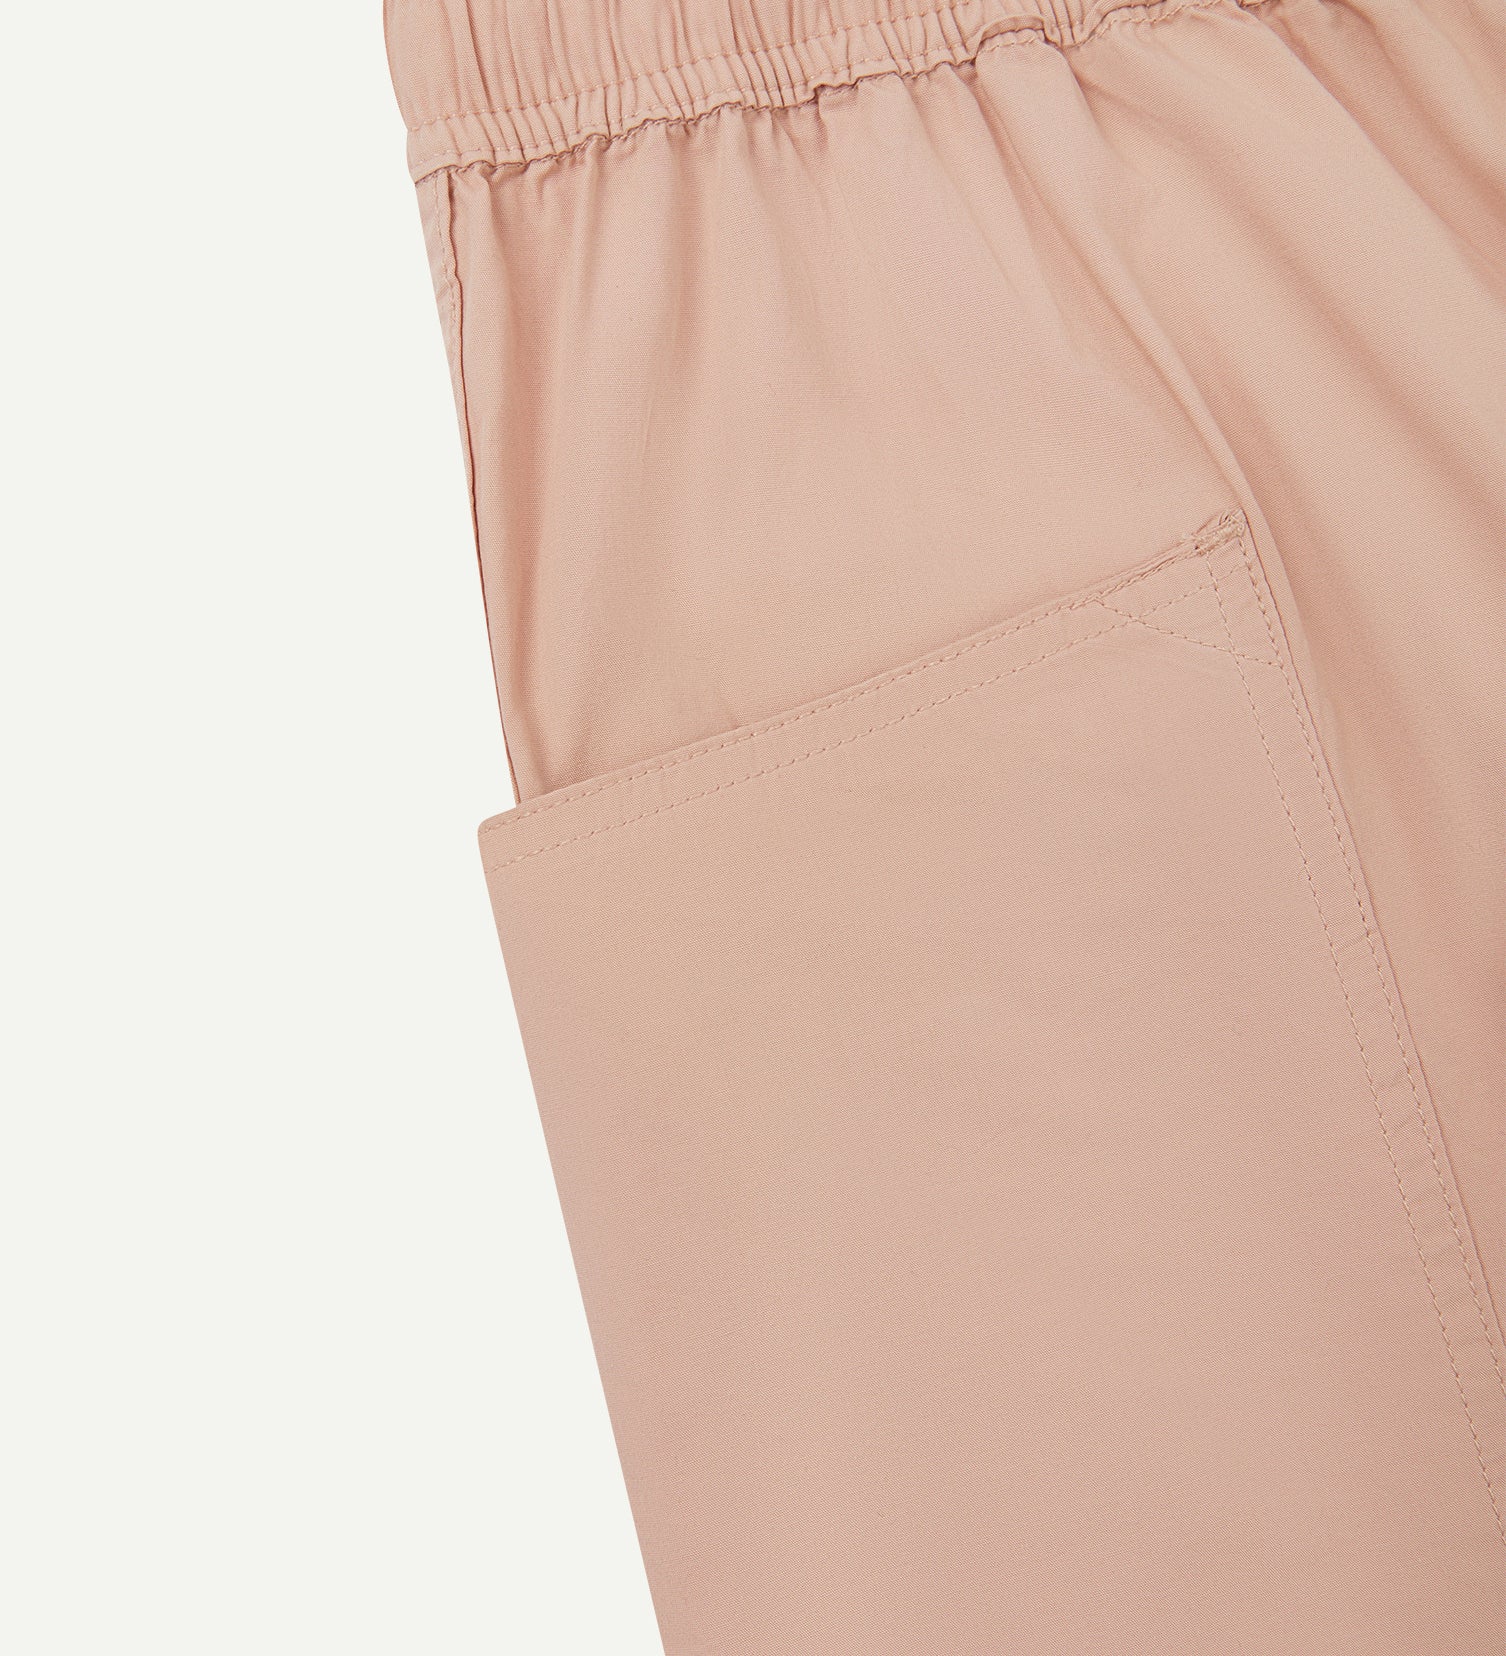 Close-up view of dusty pink organic cotton #5015 lightweight cotton shorts by Uskees showing elasticated waist and deep front pocket.